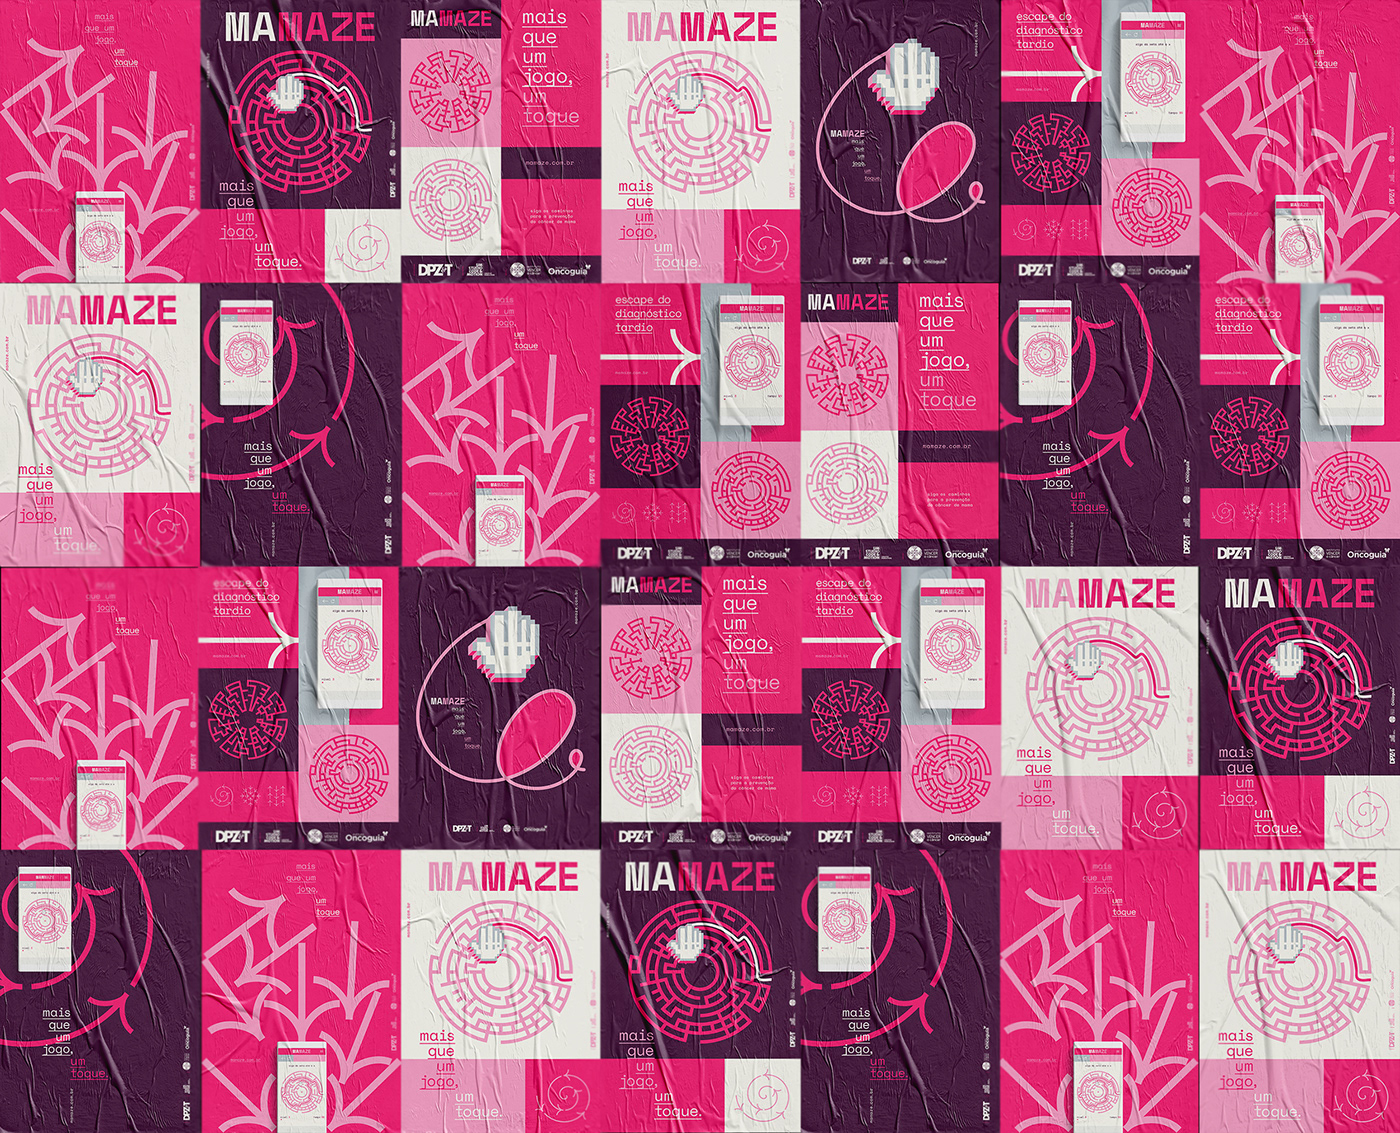 outubro rosa october pink breast cancer pinl UI ux craft type mobile